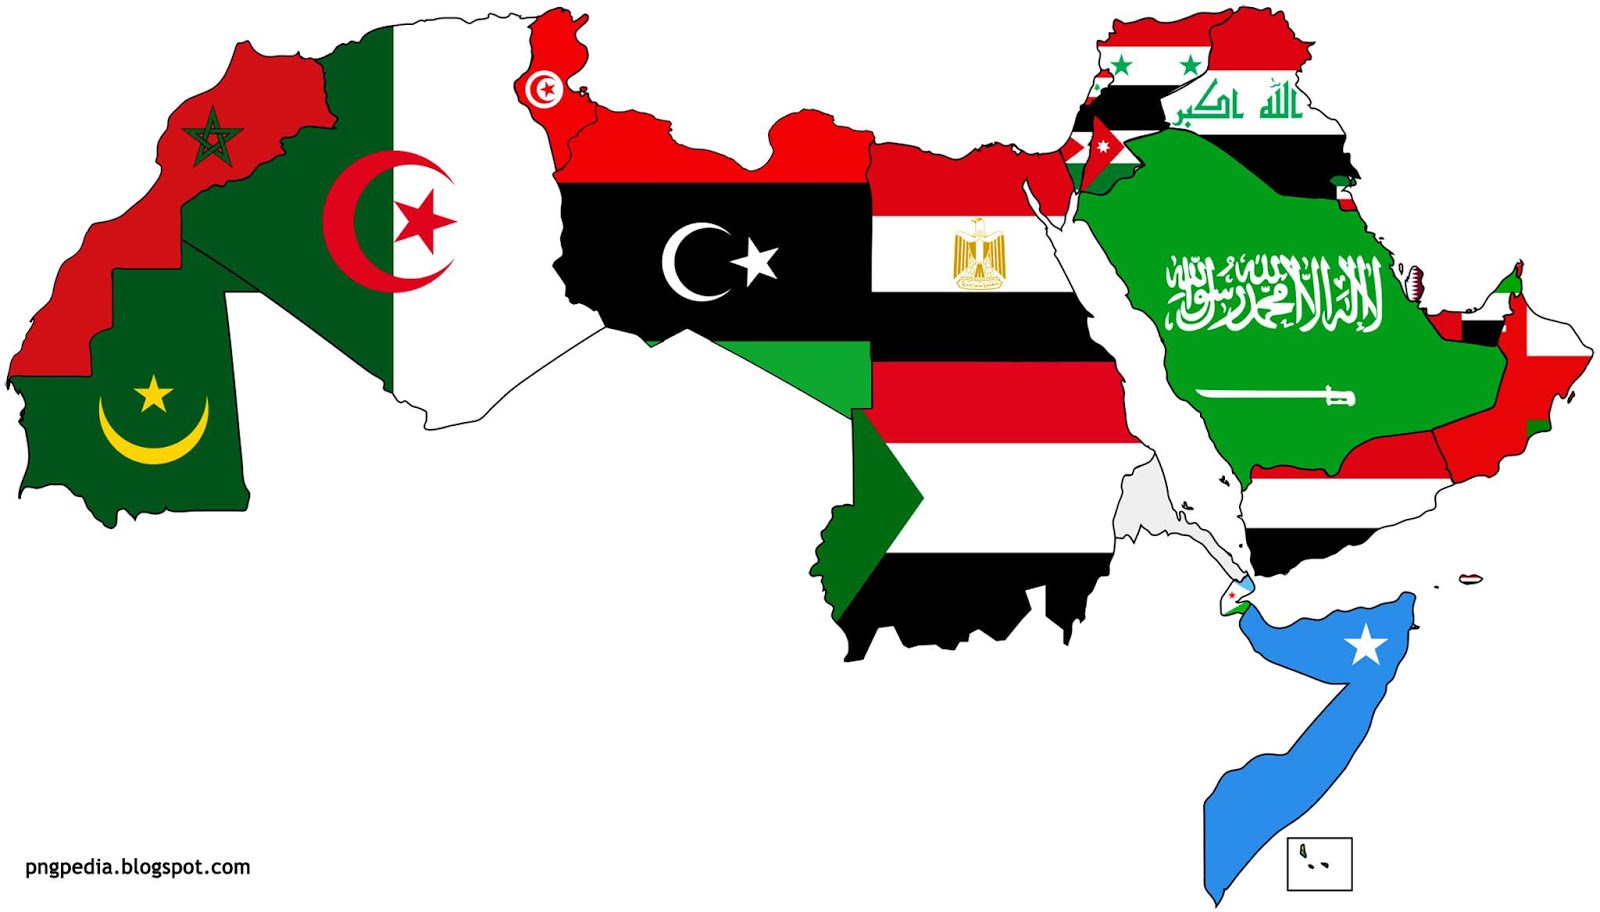 A_map_of_the_Arab_World_with_flags.jpg